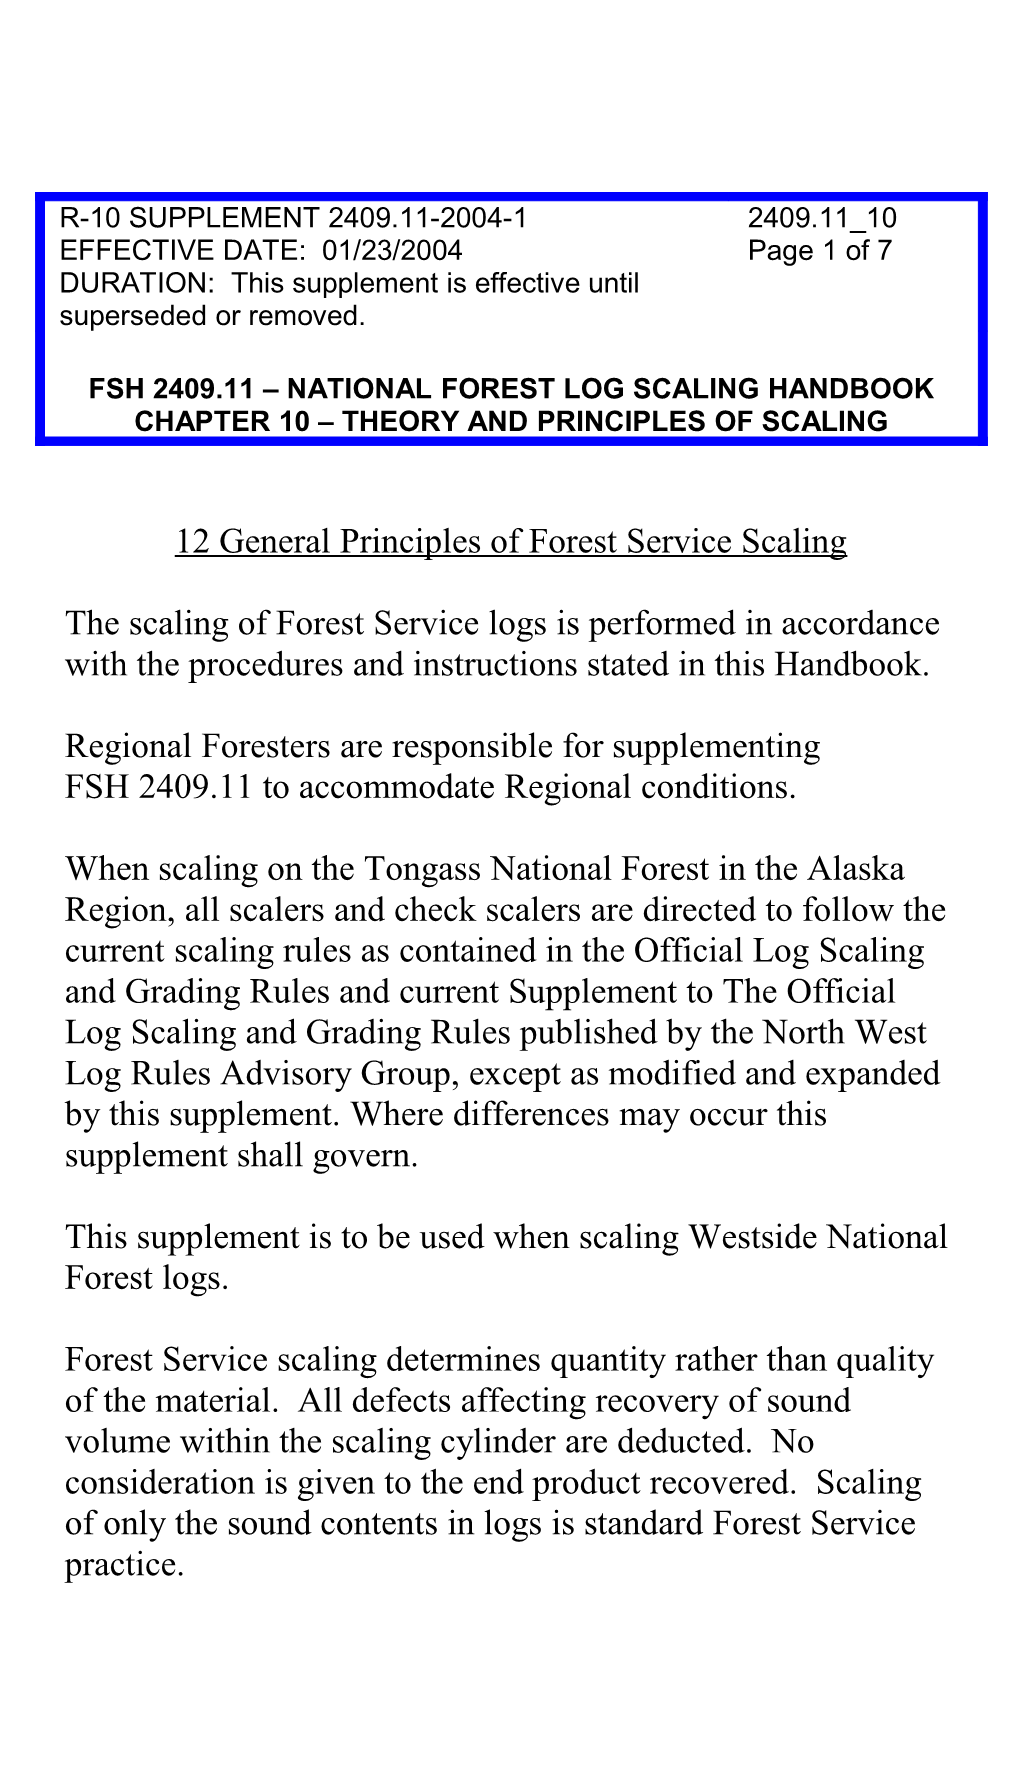 12 General Principles of Forest Service Scaling